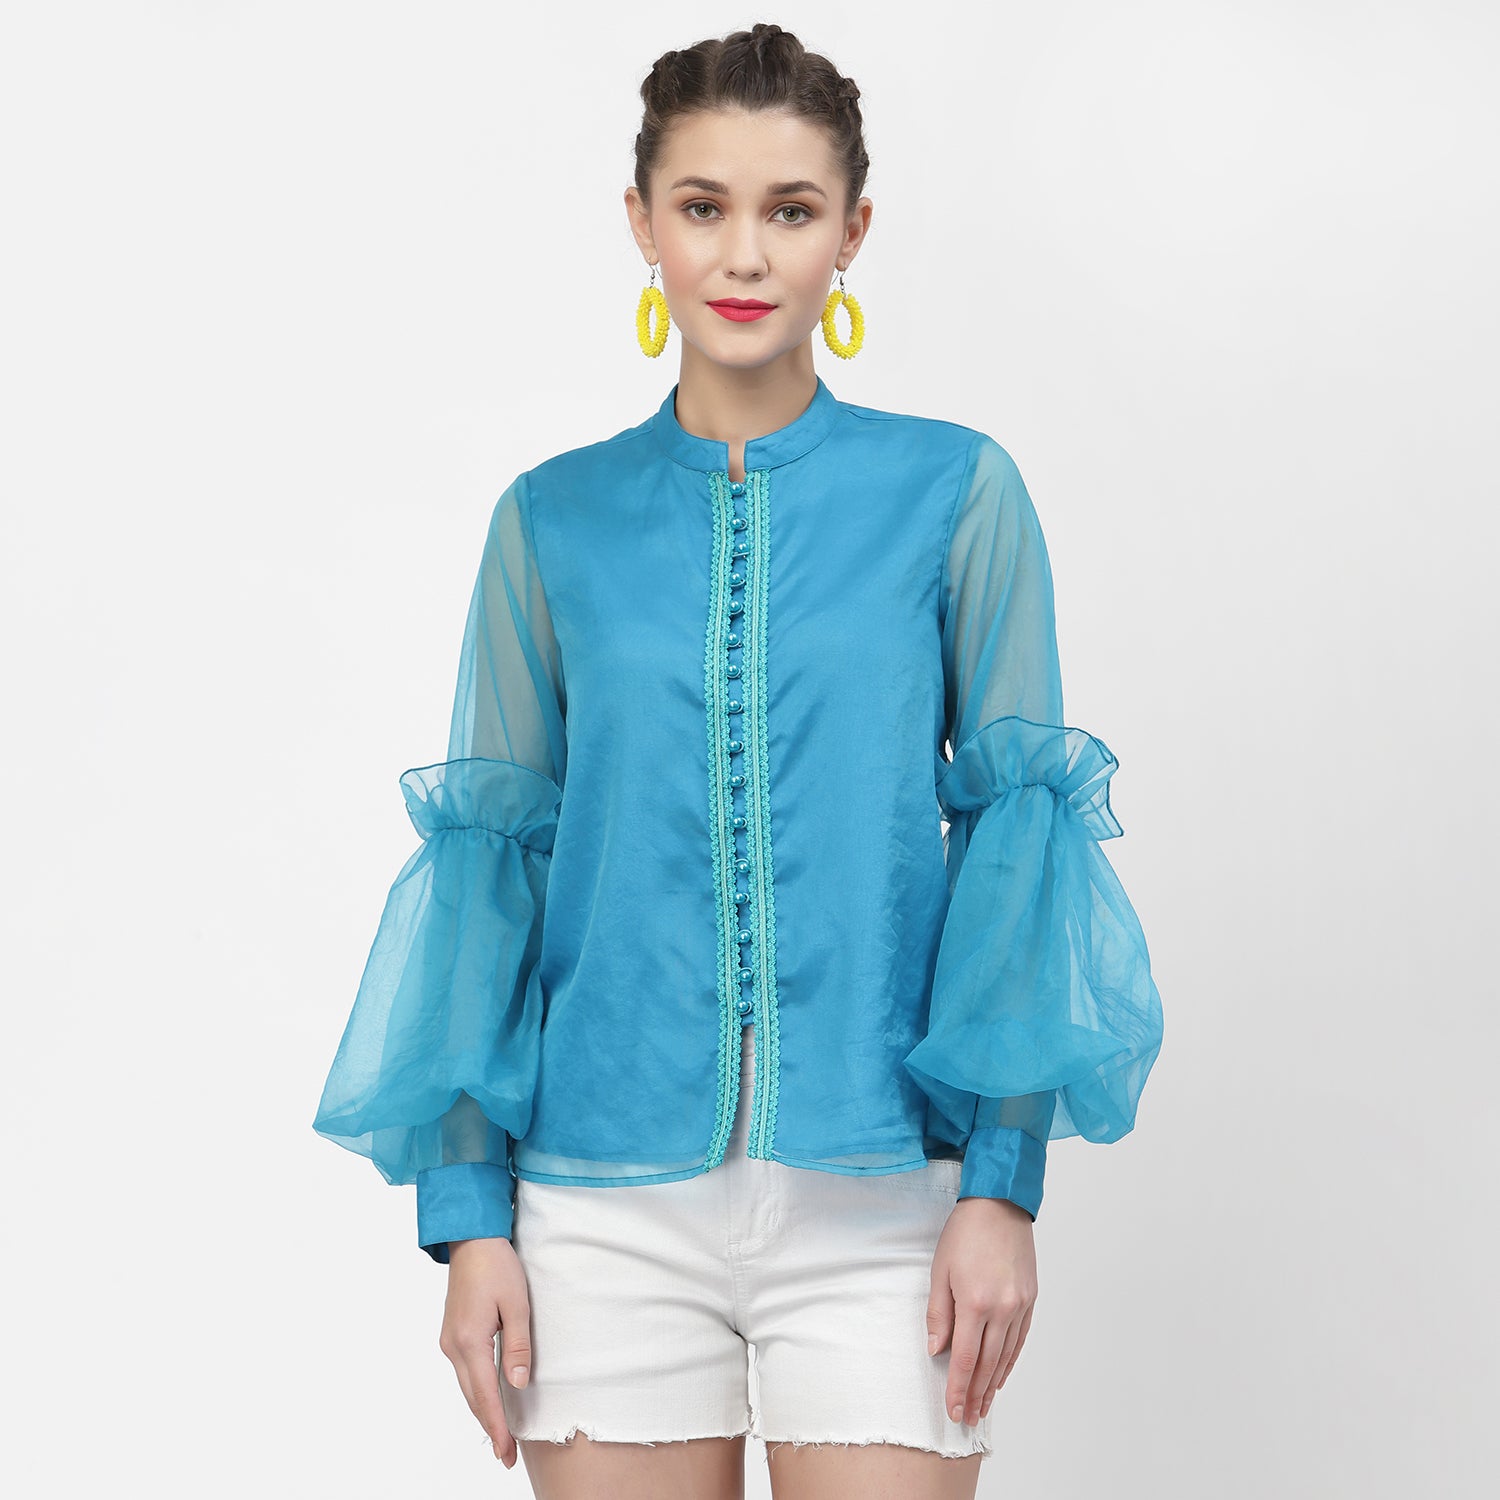 Turquoise Organza Top With Buttons And Laces